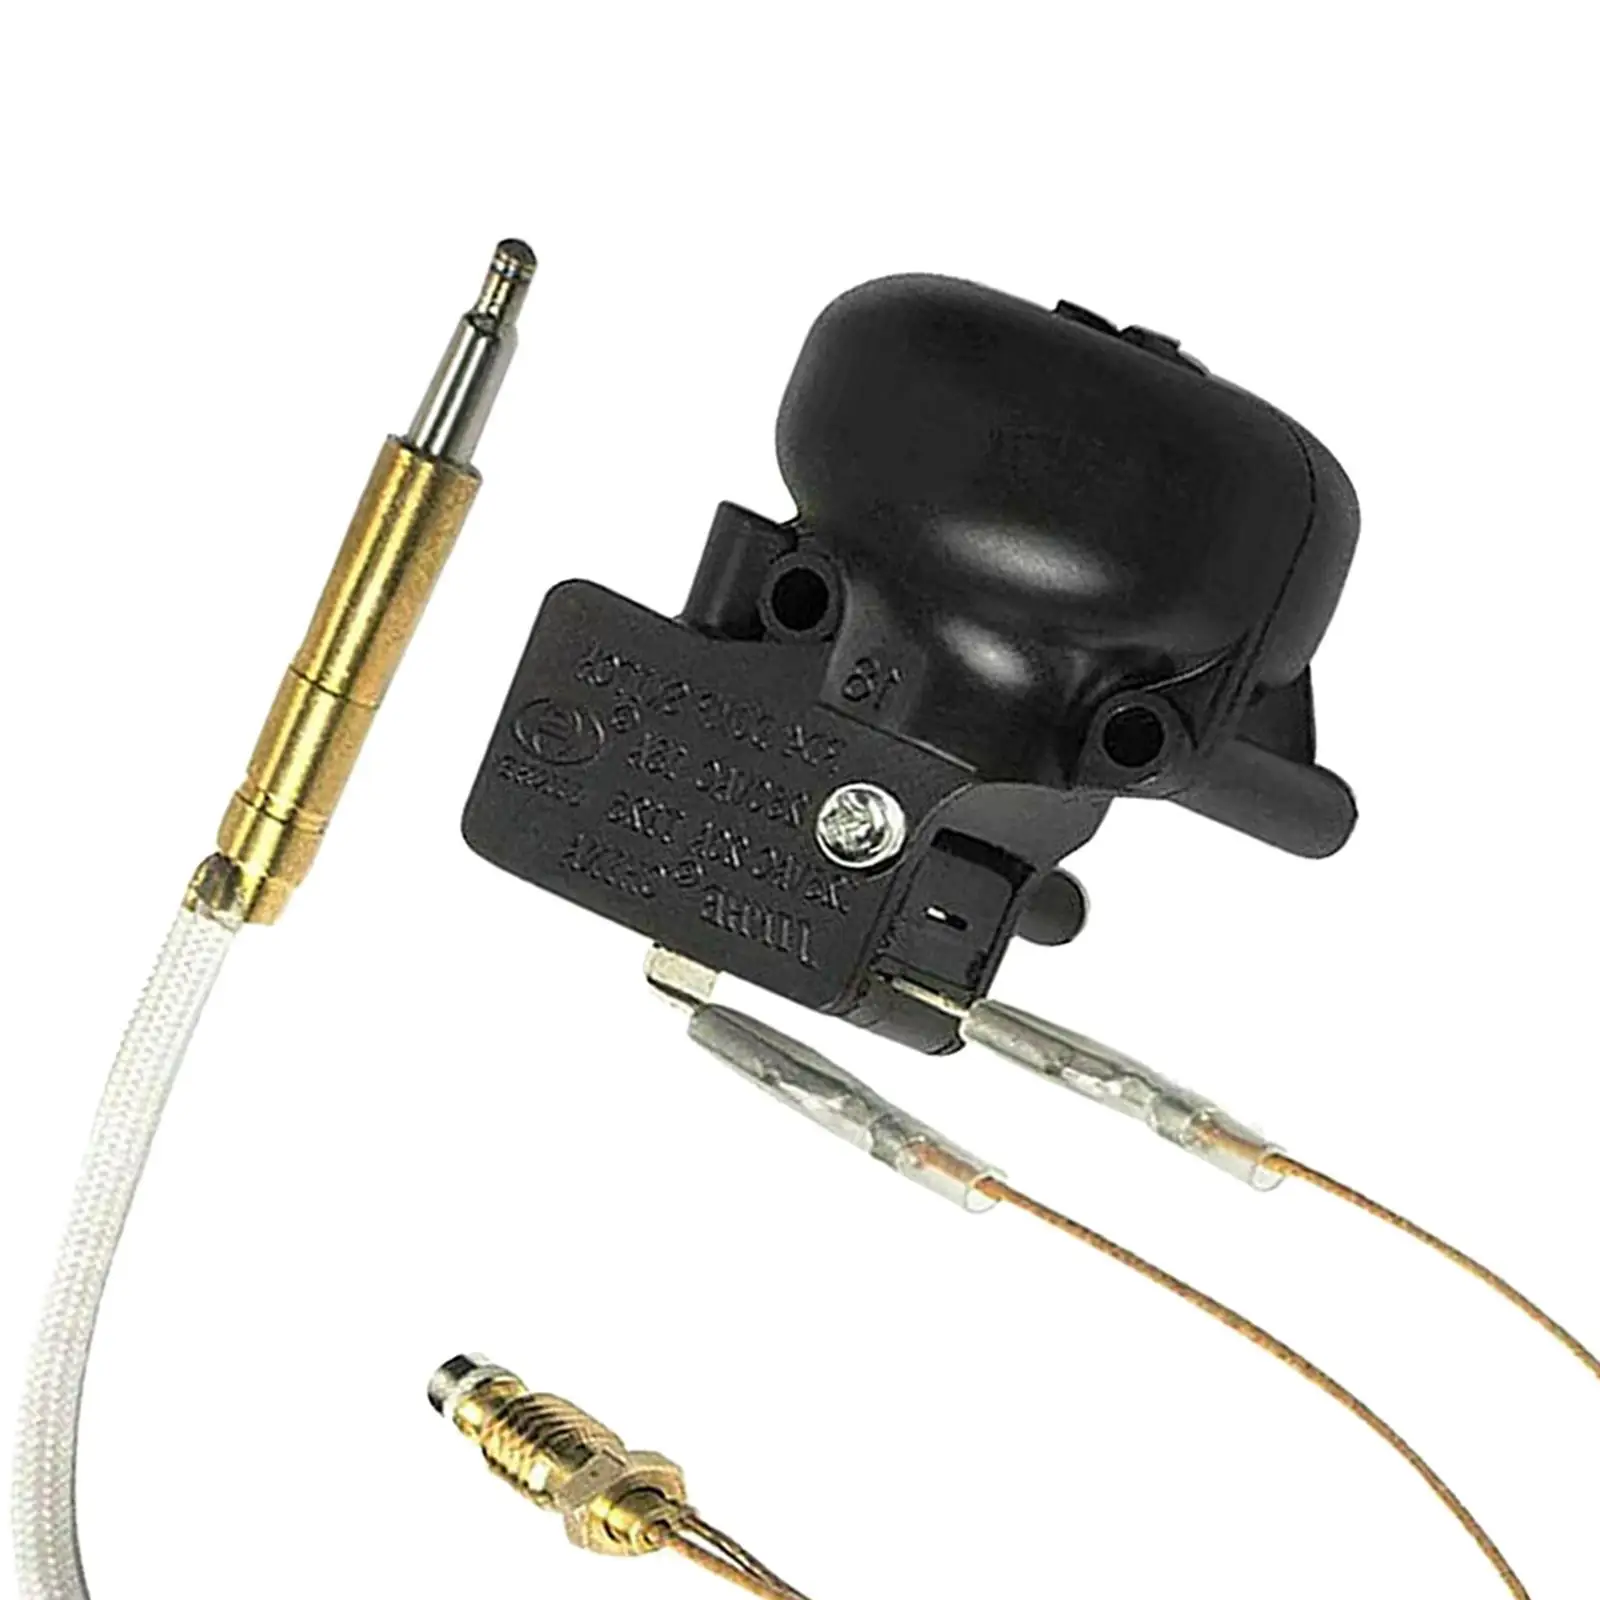 Replacement Thermocouple Tilt Switch for Patio Heater Room Garden Thermocouple Repair